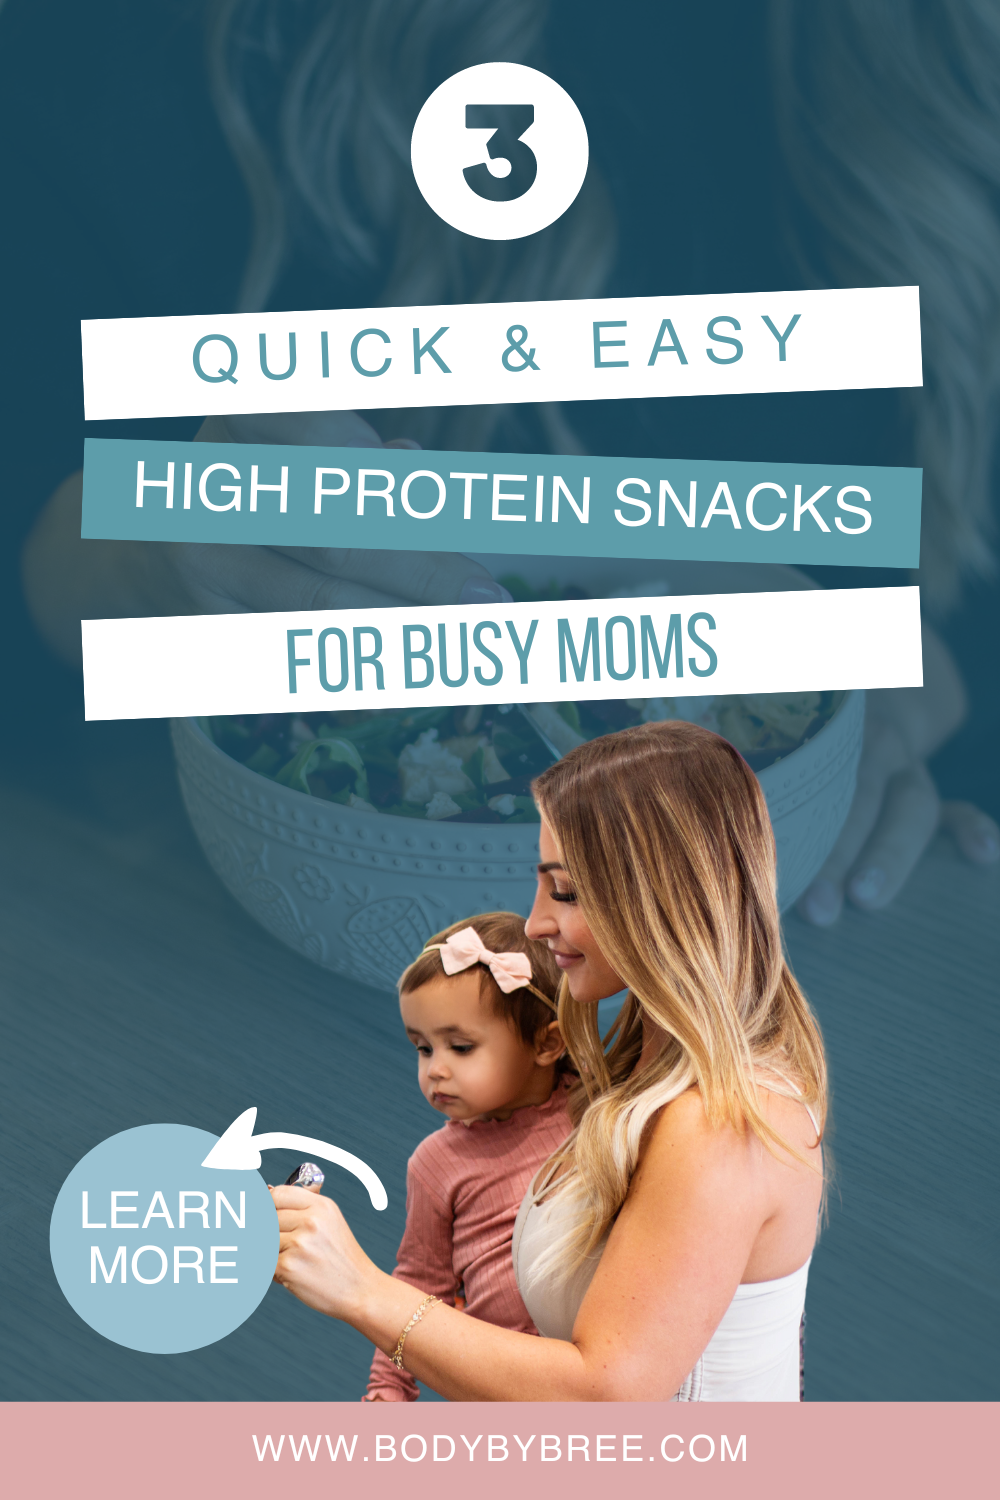 QUICK & EASY HIGH PROTEIN SNACKS FOR BUSY MOMS